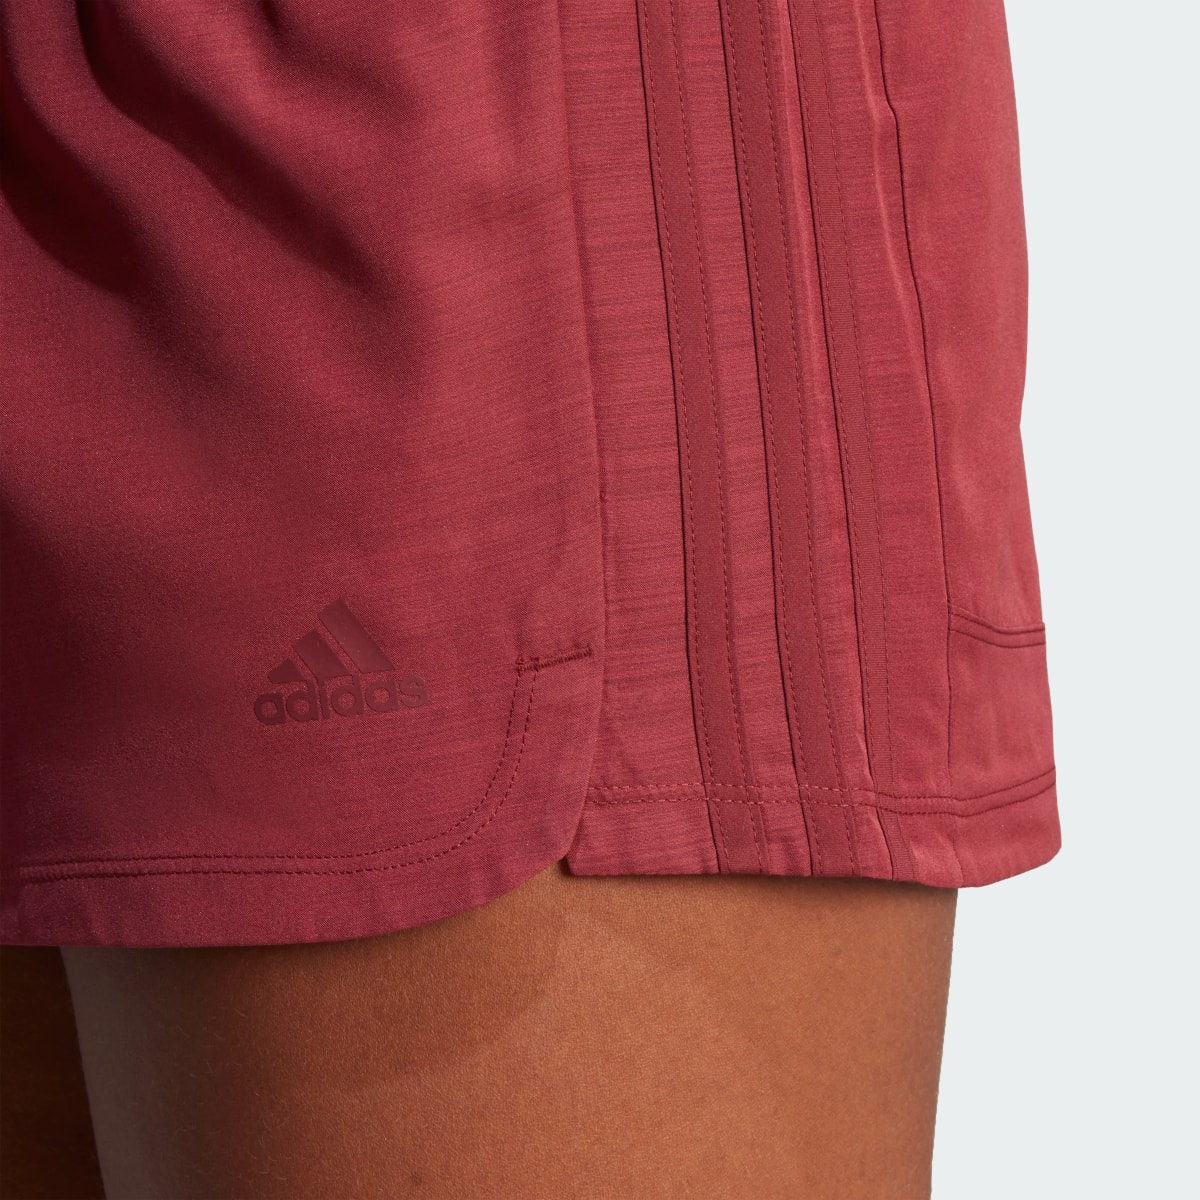 Adidas Pacer 3-Stripes Woven Heather Shorts. 6